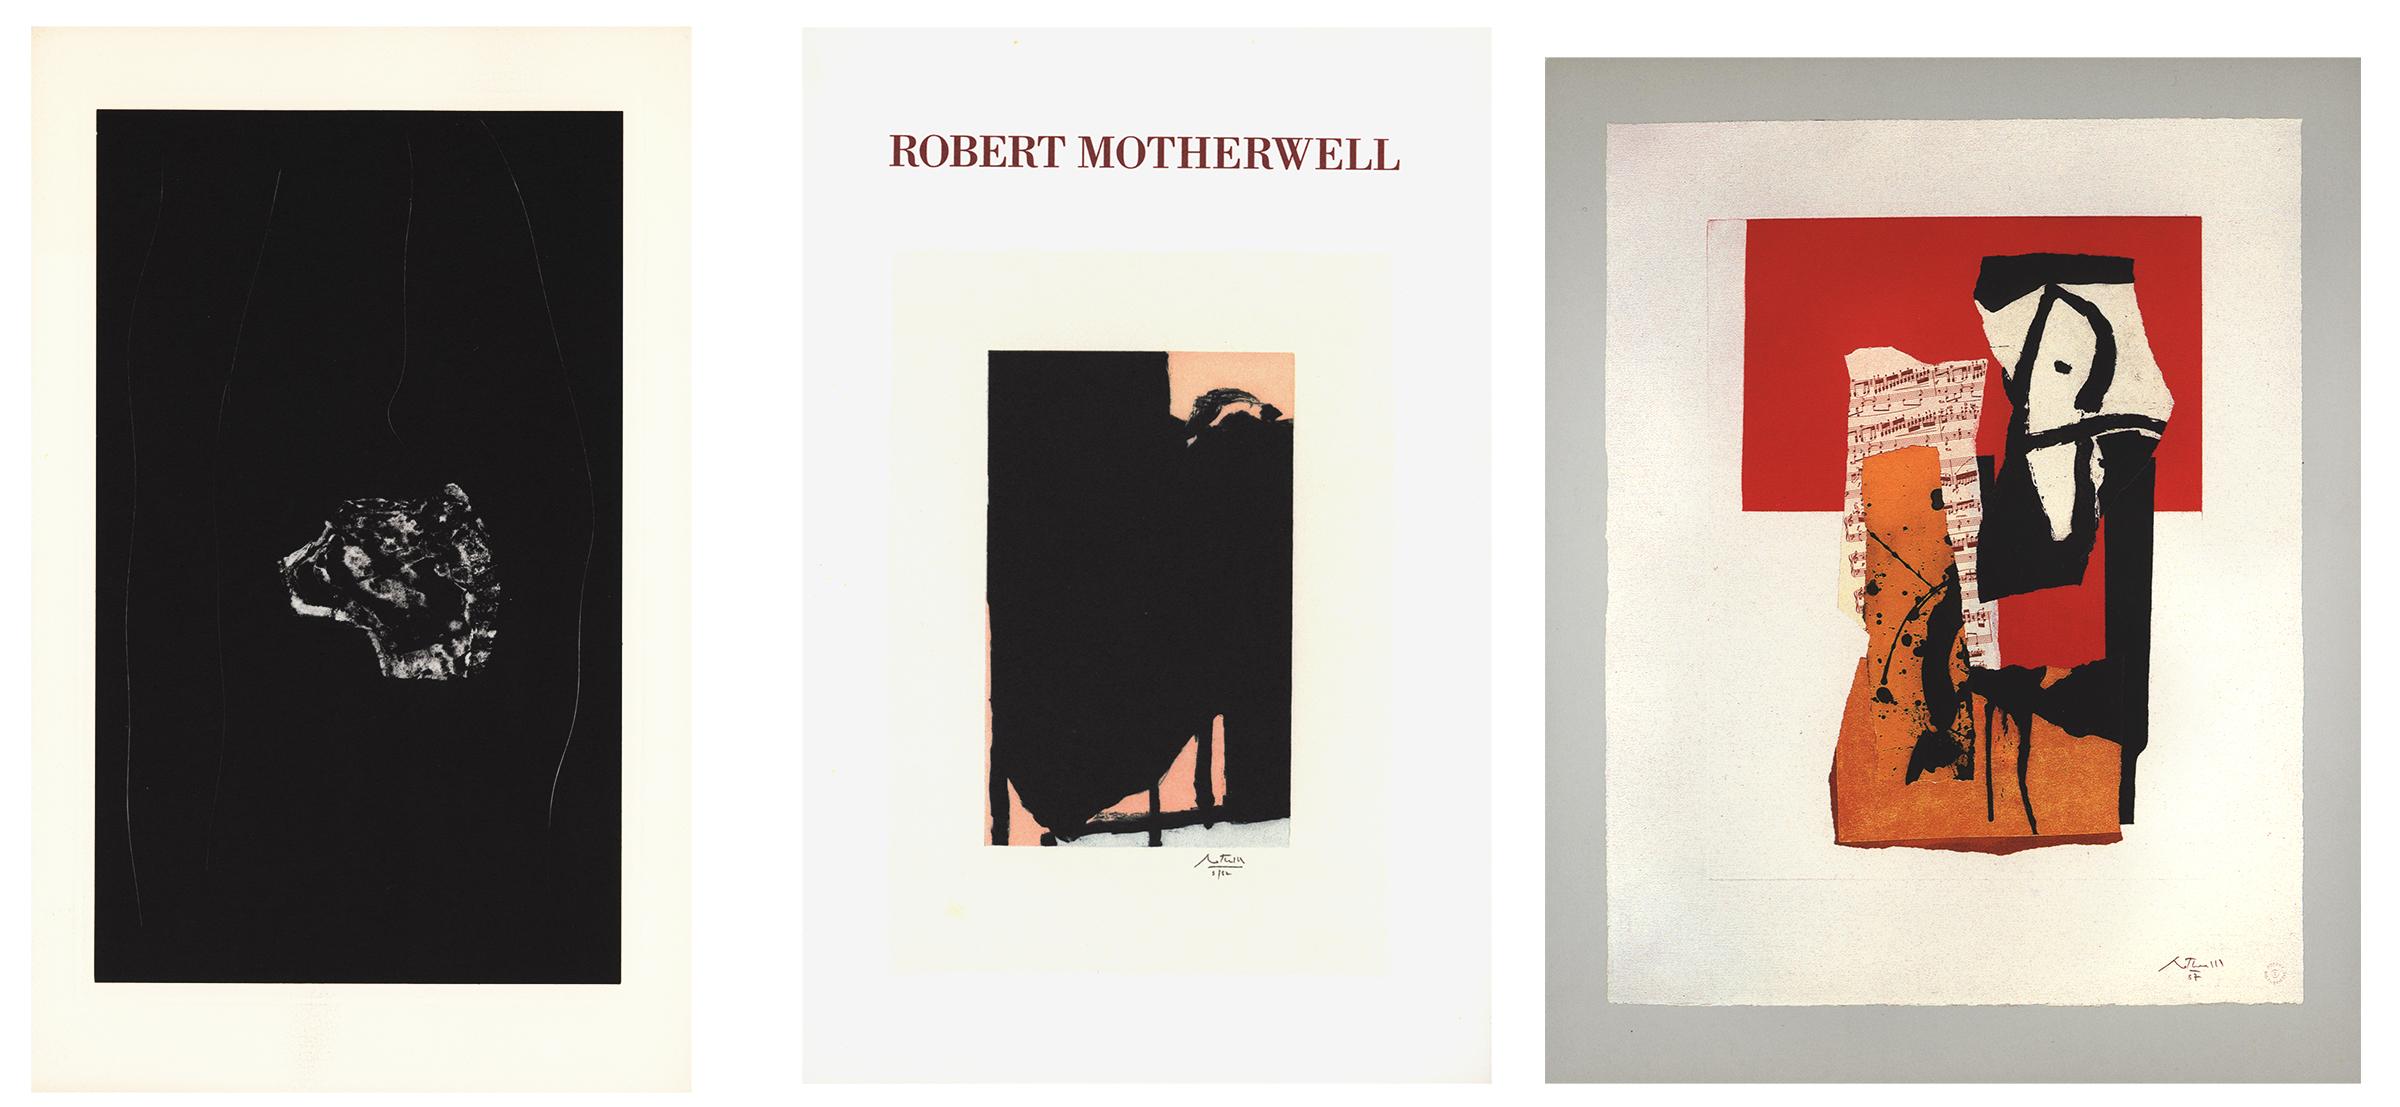 Vintage Robert Motherwell Announcement cards: 
Set of 3 announcement cards featuring his works "Color Intaglios", "Elegy fragment II"  as well as work from his show "Robert Motherwell & Black". Suitable for framing. Very good vintage condition.